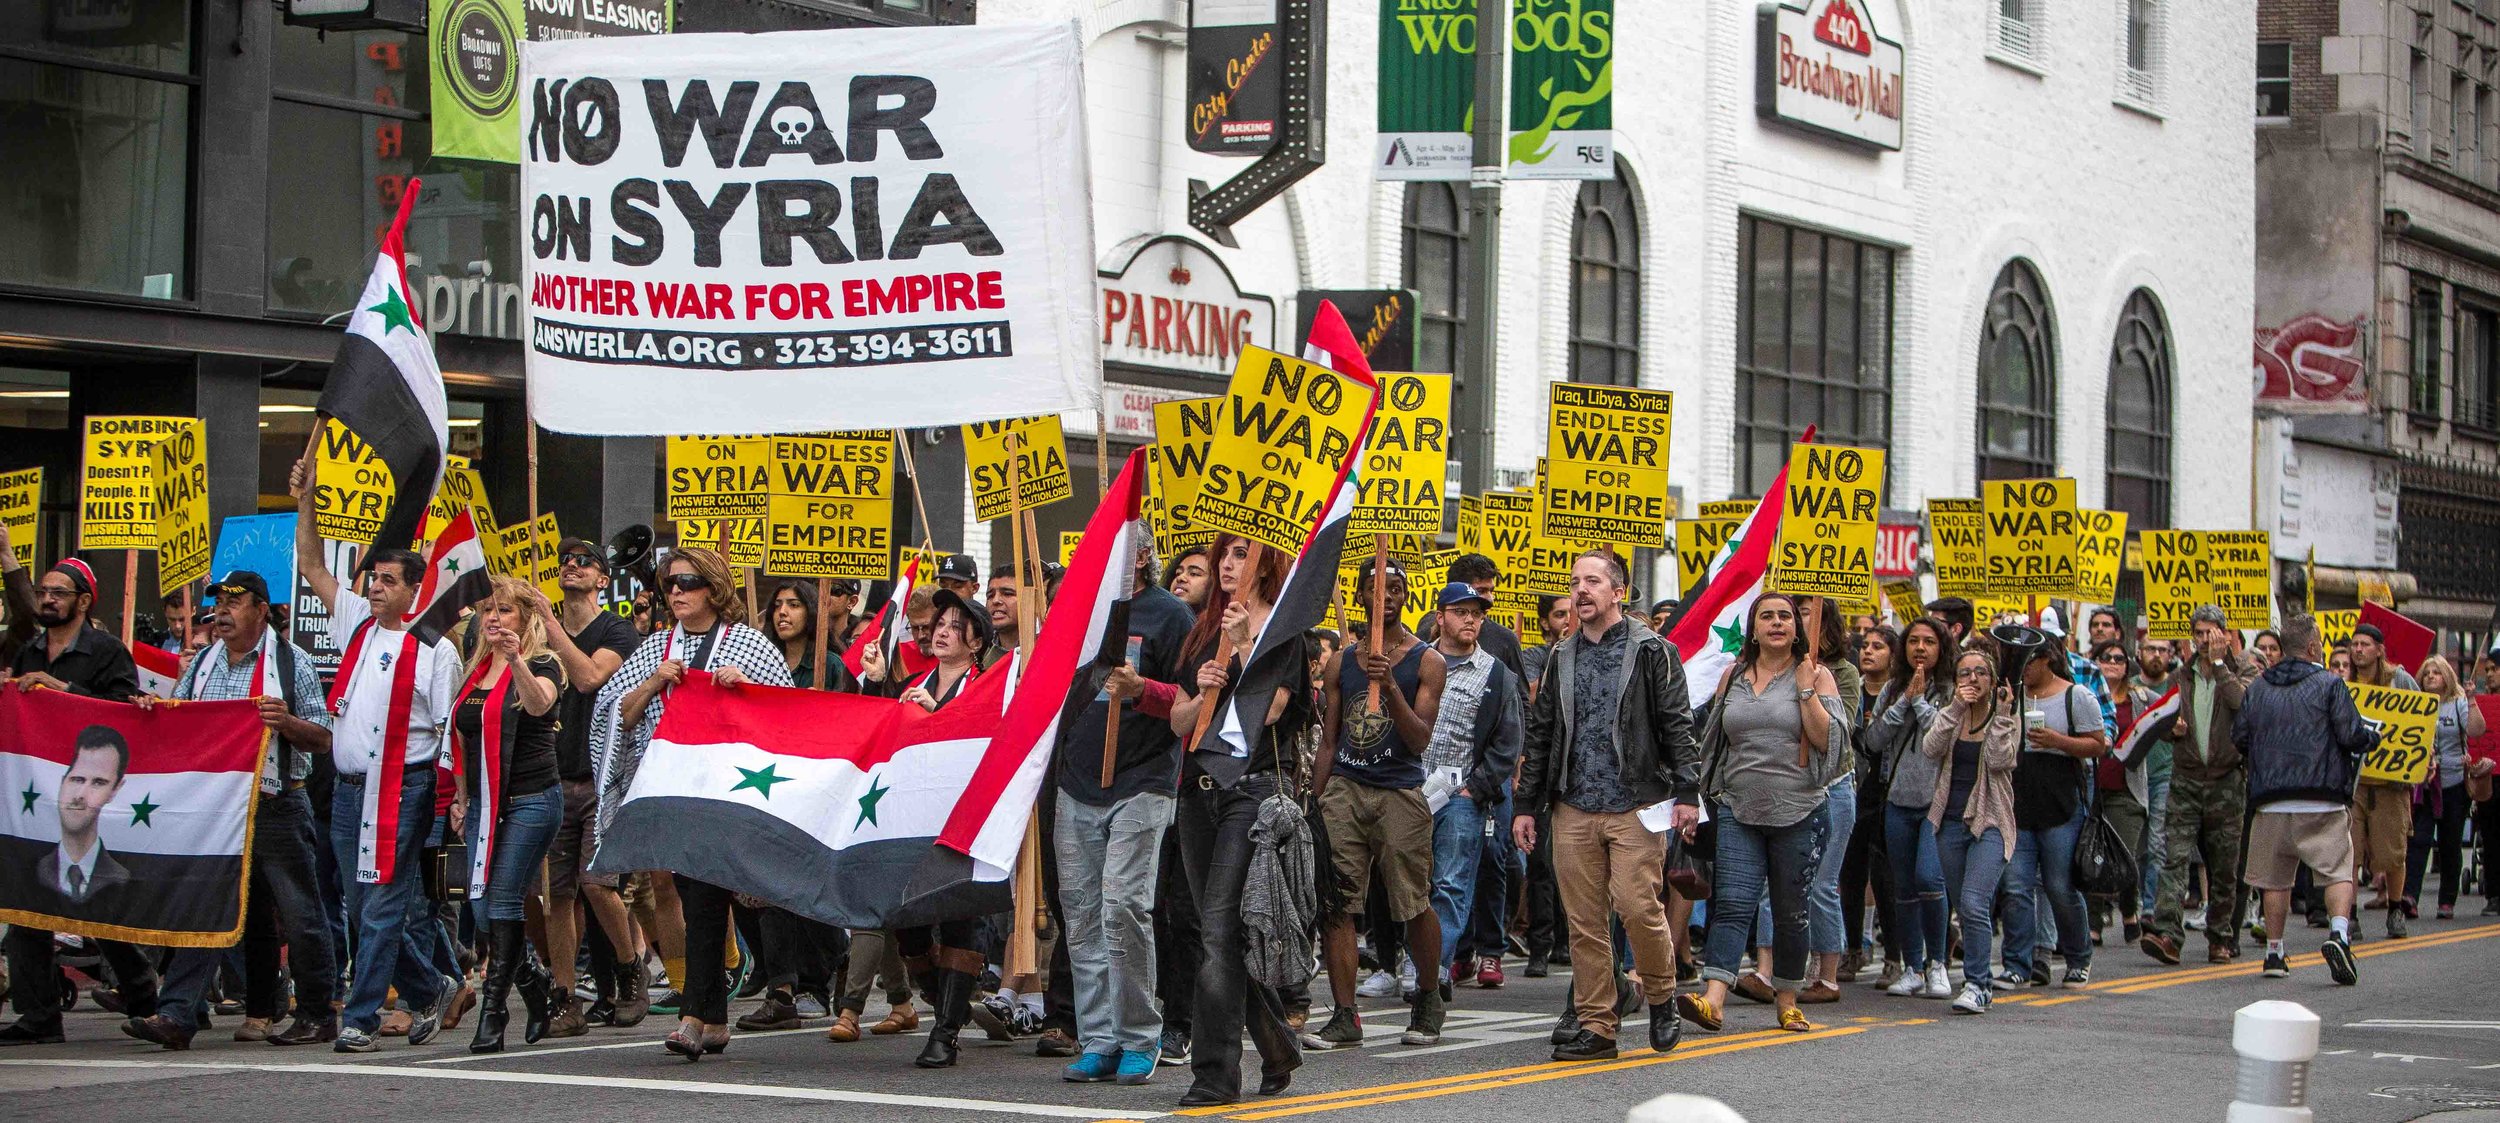  An estimated 300 protestors gathered at Pershing Square and marched to City Hall. Protestors across the US demonstrated against the airstrikes in Syria ordered by US President Donald Trump. Los Angees, California, April 8, 2017. Daniel Bowyer 